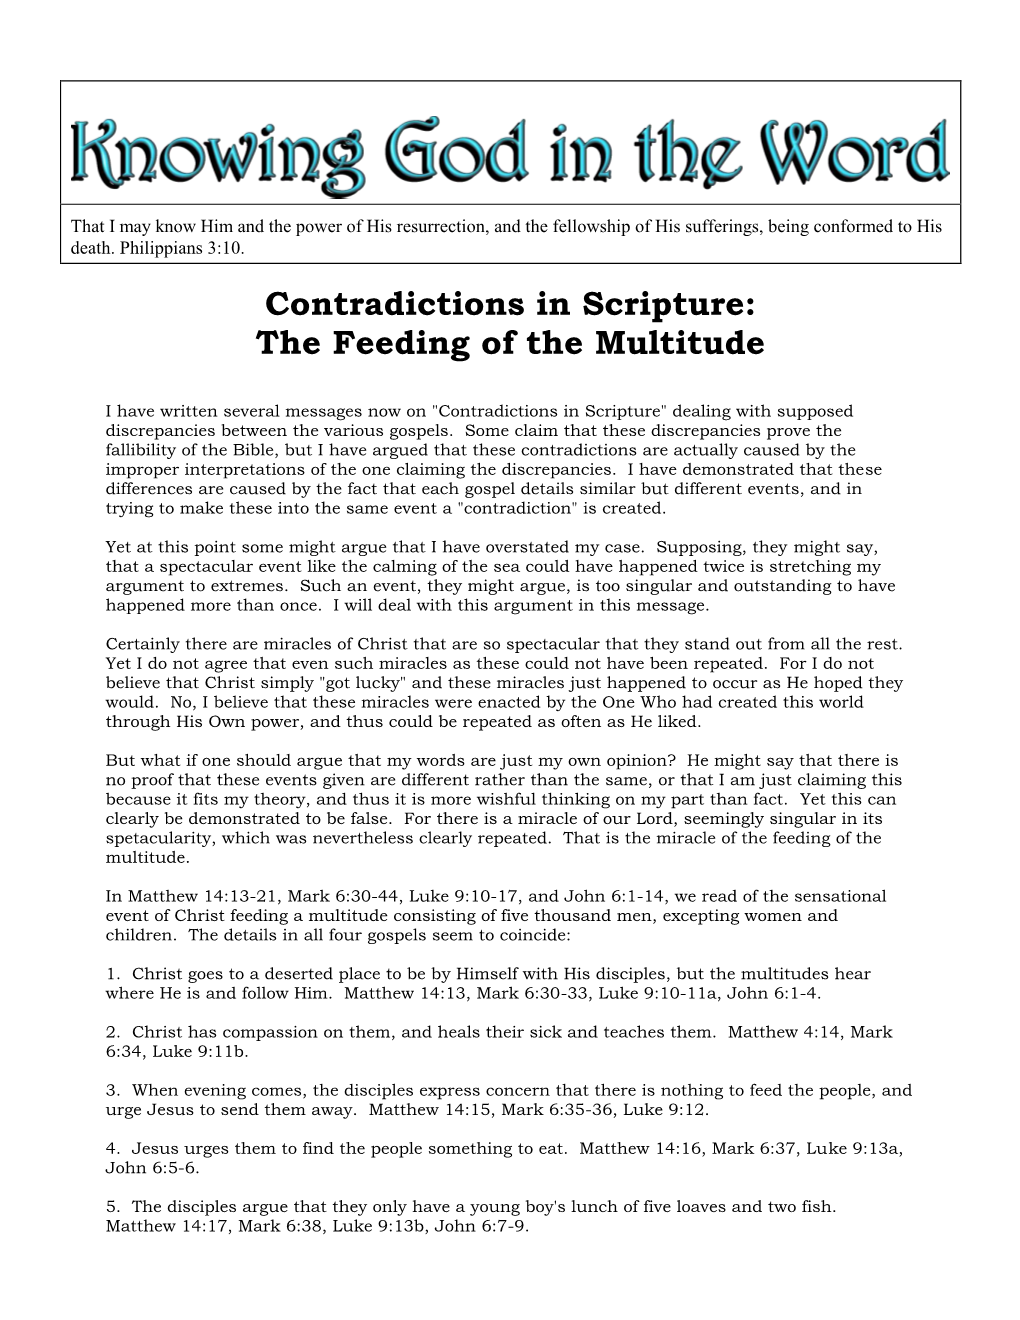 Contradictions in Scripture: the Feeding of the Multitude